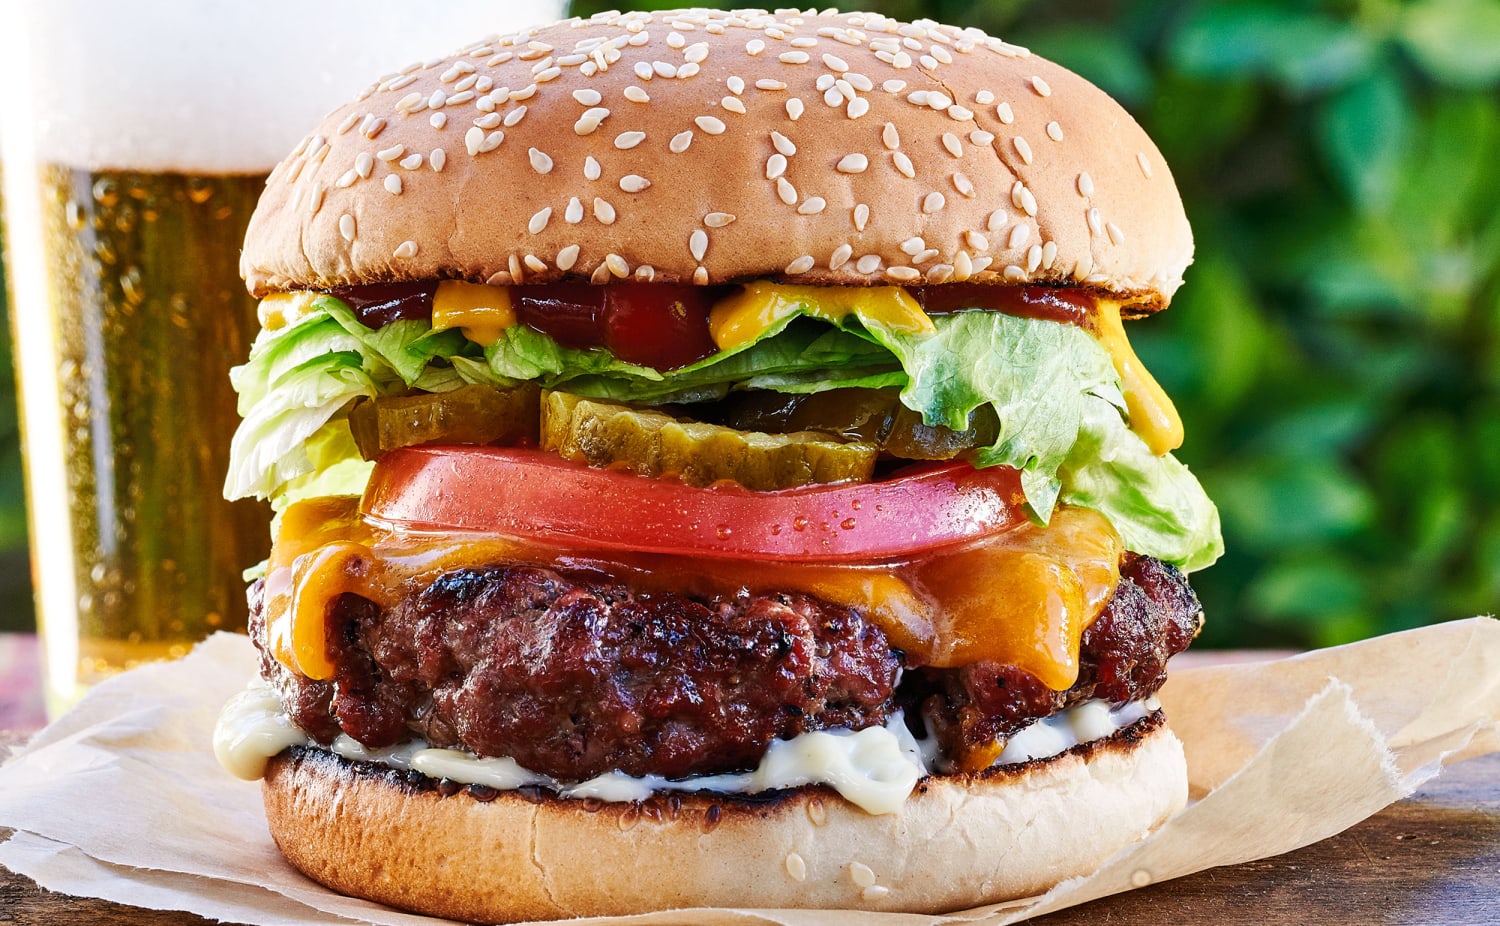 Man vs food best recipes 8 Chefs Share Their Favorite Burger Recipes For Summer